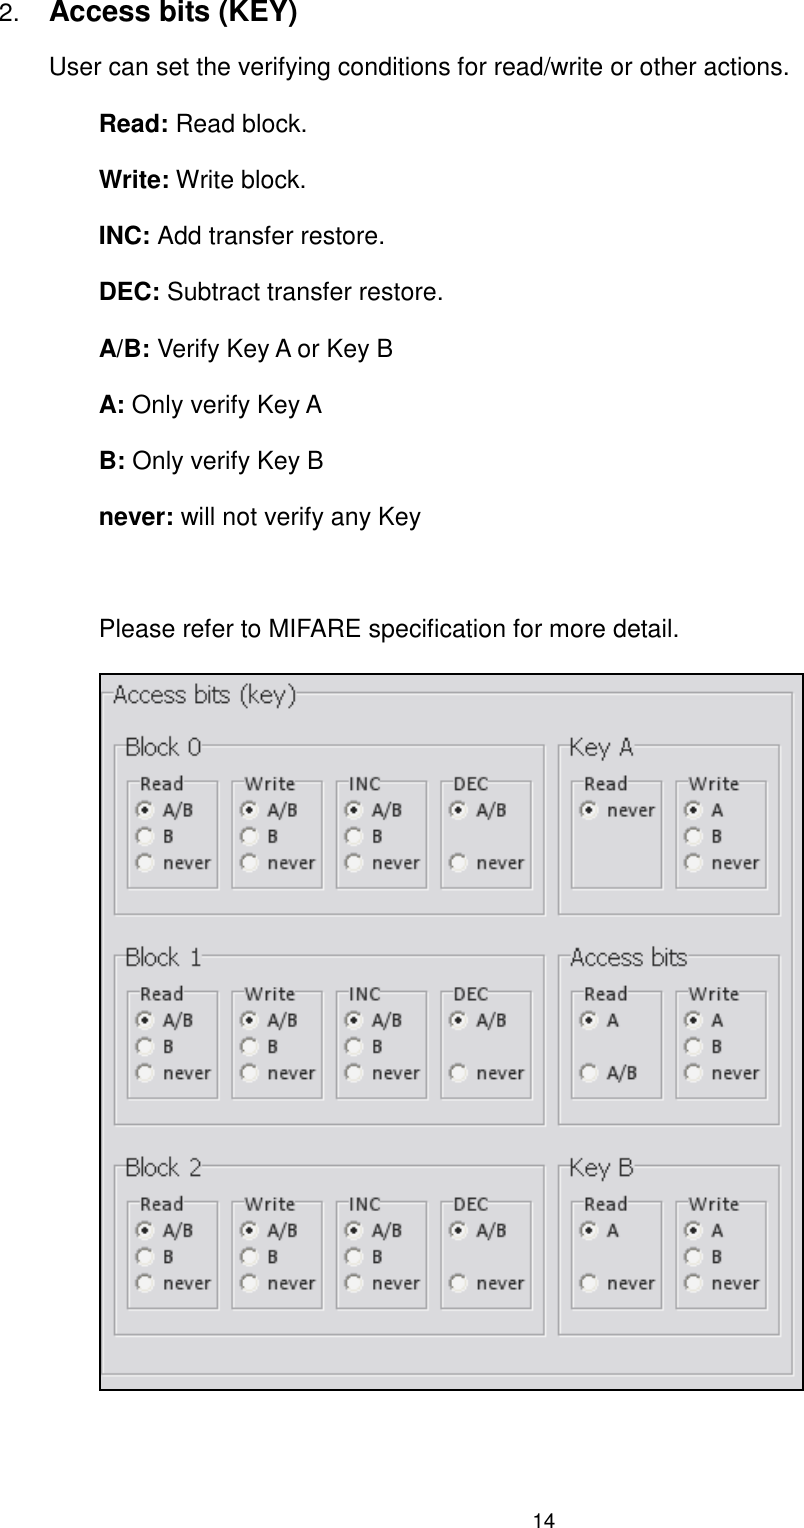 14  2. Access bits (KEY)   User can set the verifying conditions for read/write or other actions. Read: Read block. Write: Write block. INC: Add transfer restore. DEC: Subtract transfer restore. A/B: Verify Key A or Key B A: Only verify Key A B: Only verify Key B never: will not verify any Key  Please refer to MIFARE specification for more detail.    